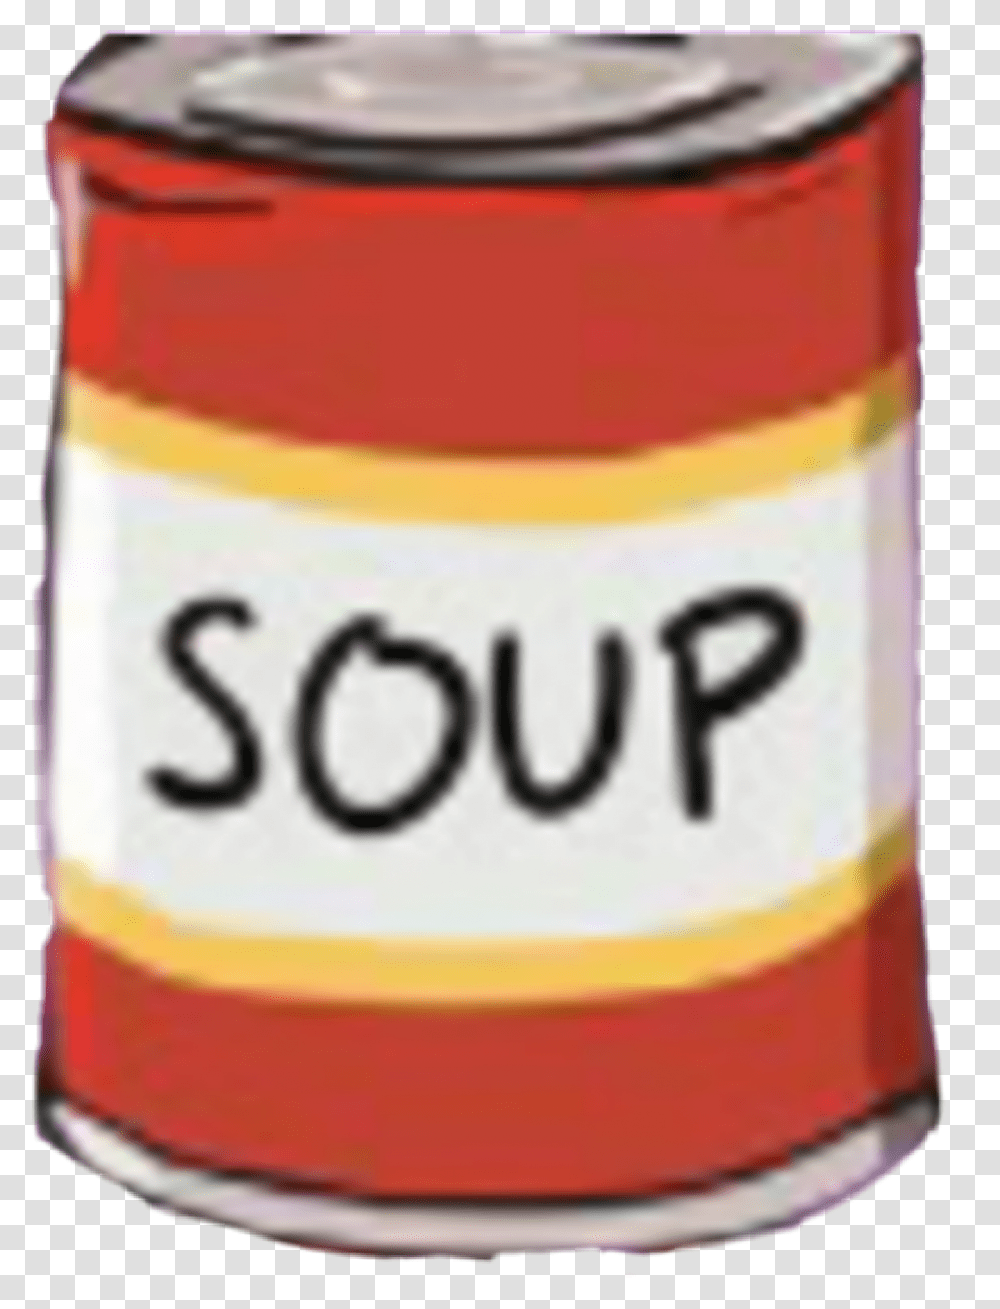 Soup 60 Seconds Soup Can, Birthday Cake, Food, Tin, Label Transparent Png